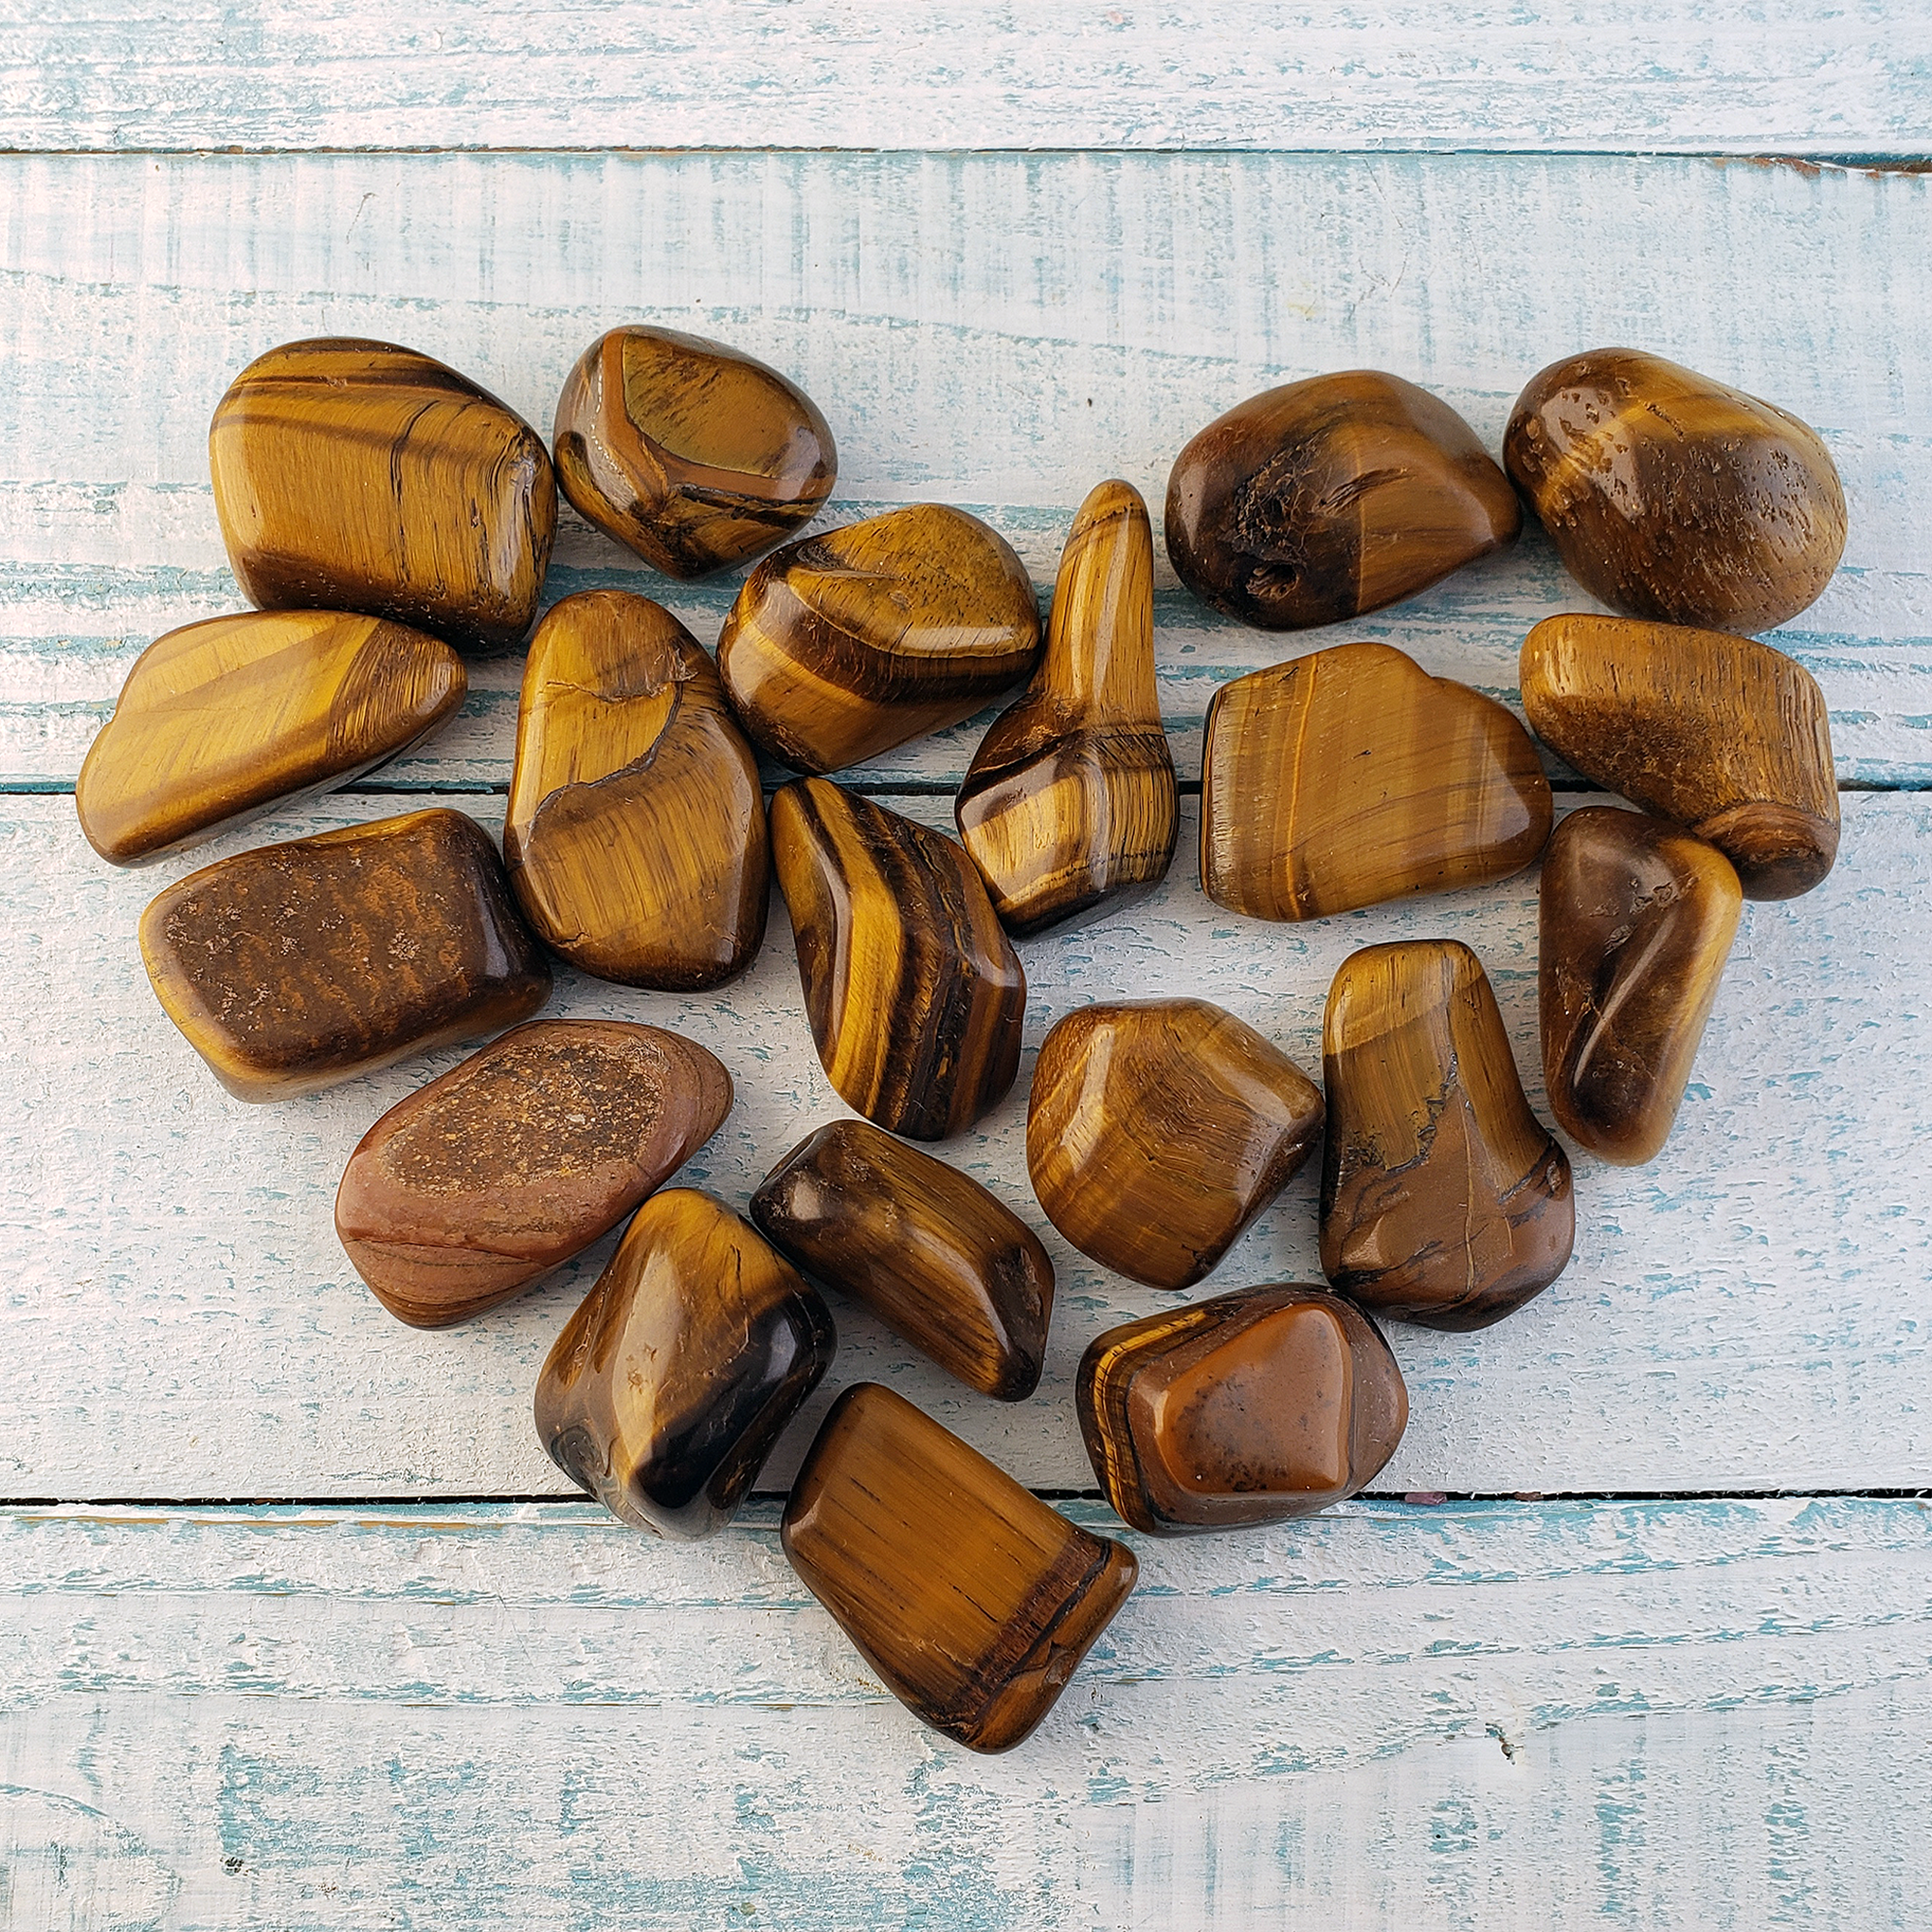 Tigers Eye Natural Tumbled Crystal - One Stone - Freeform Stones in a Heart